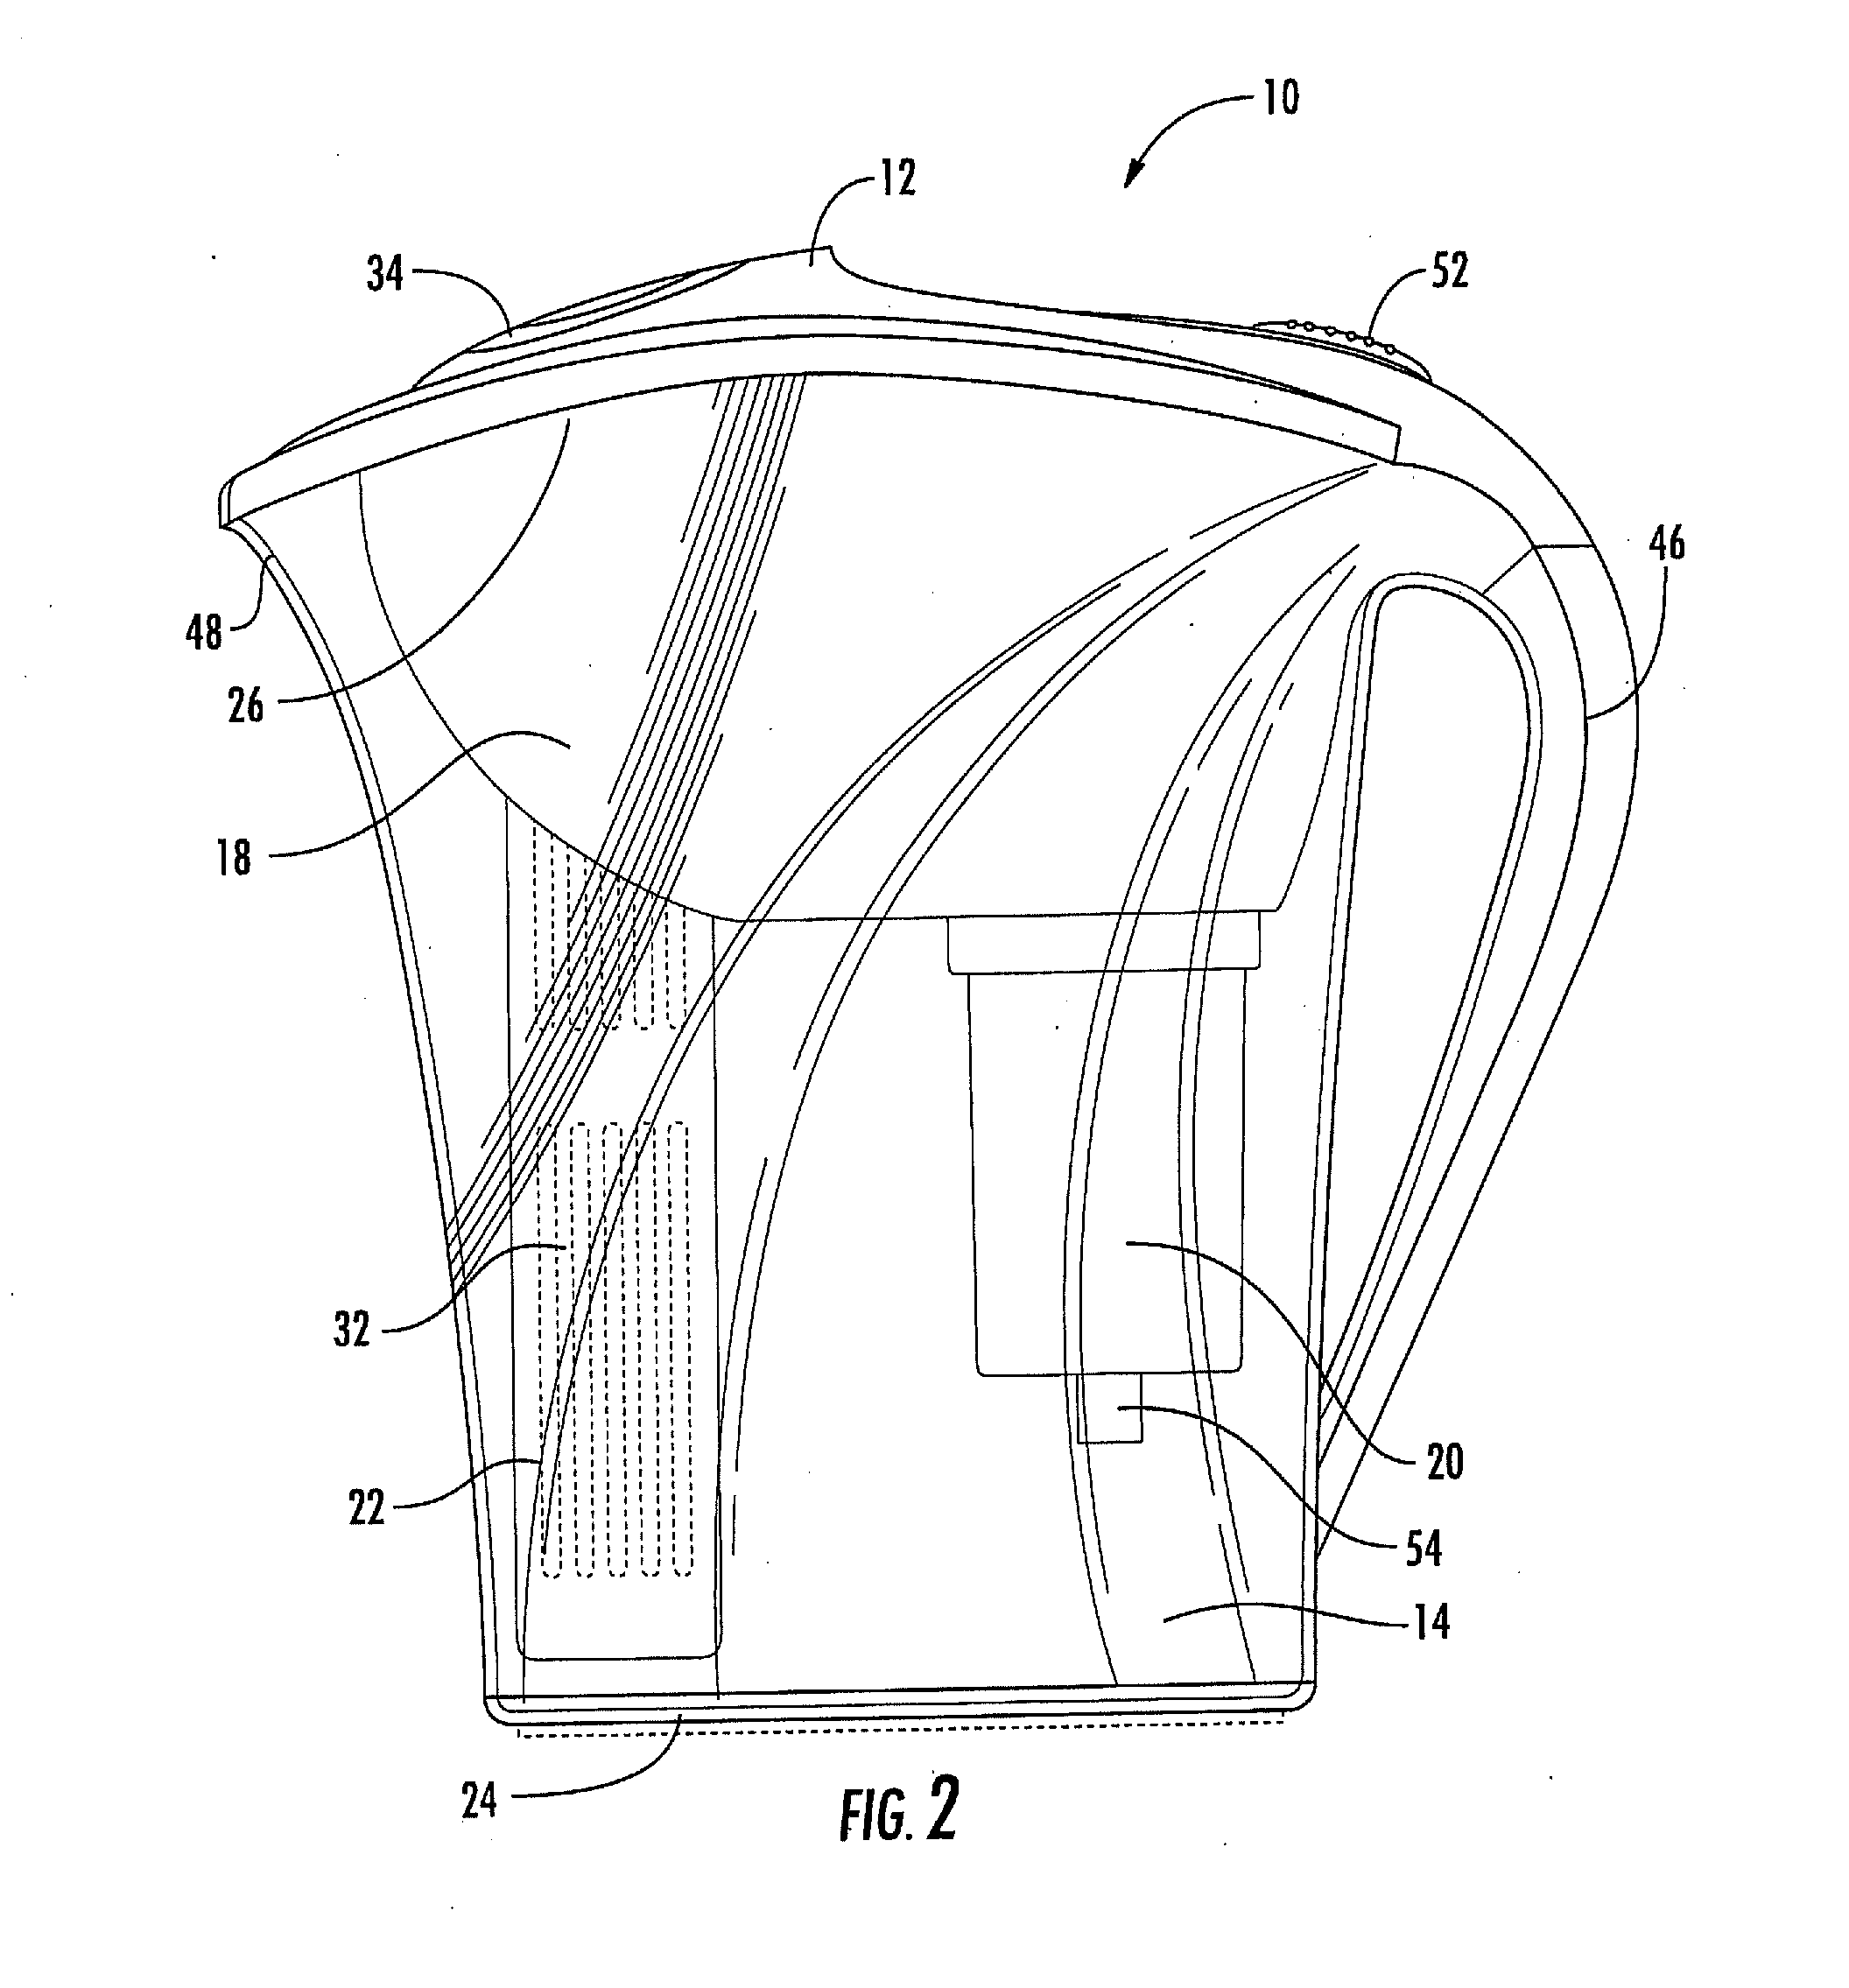 Water purifying and flavor infusion device